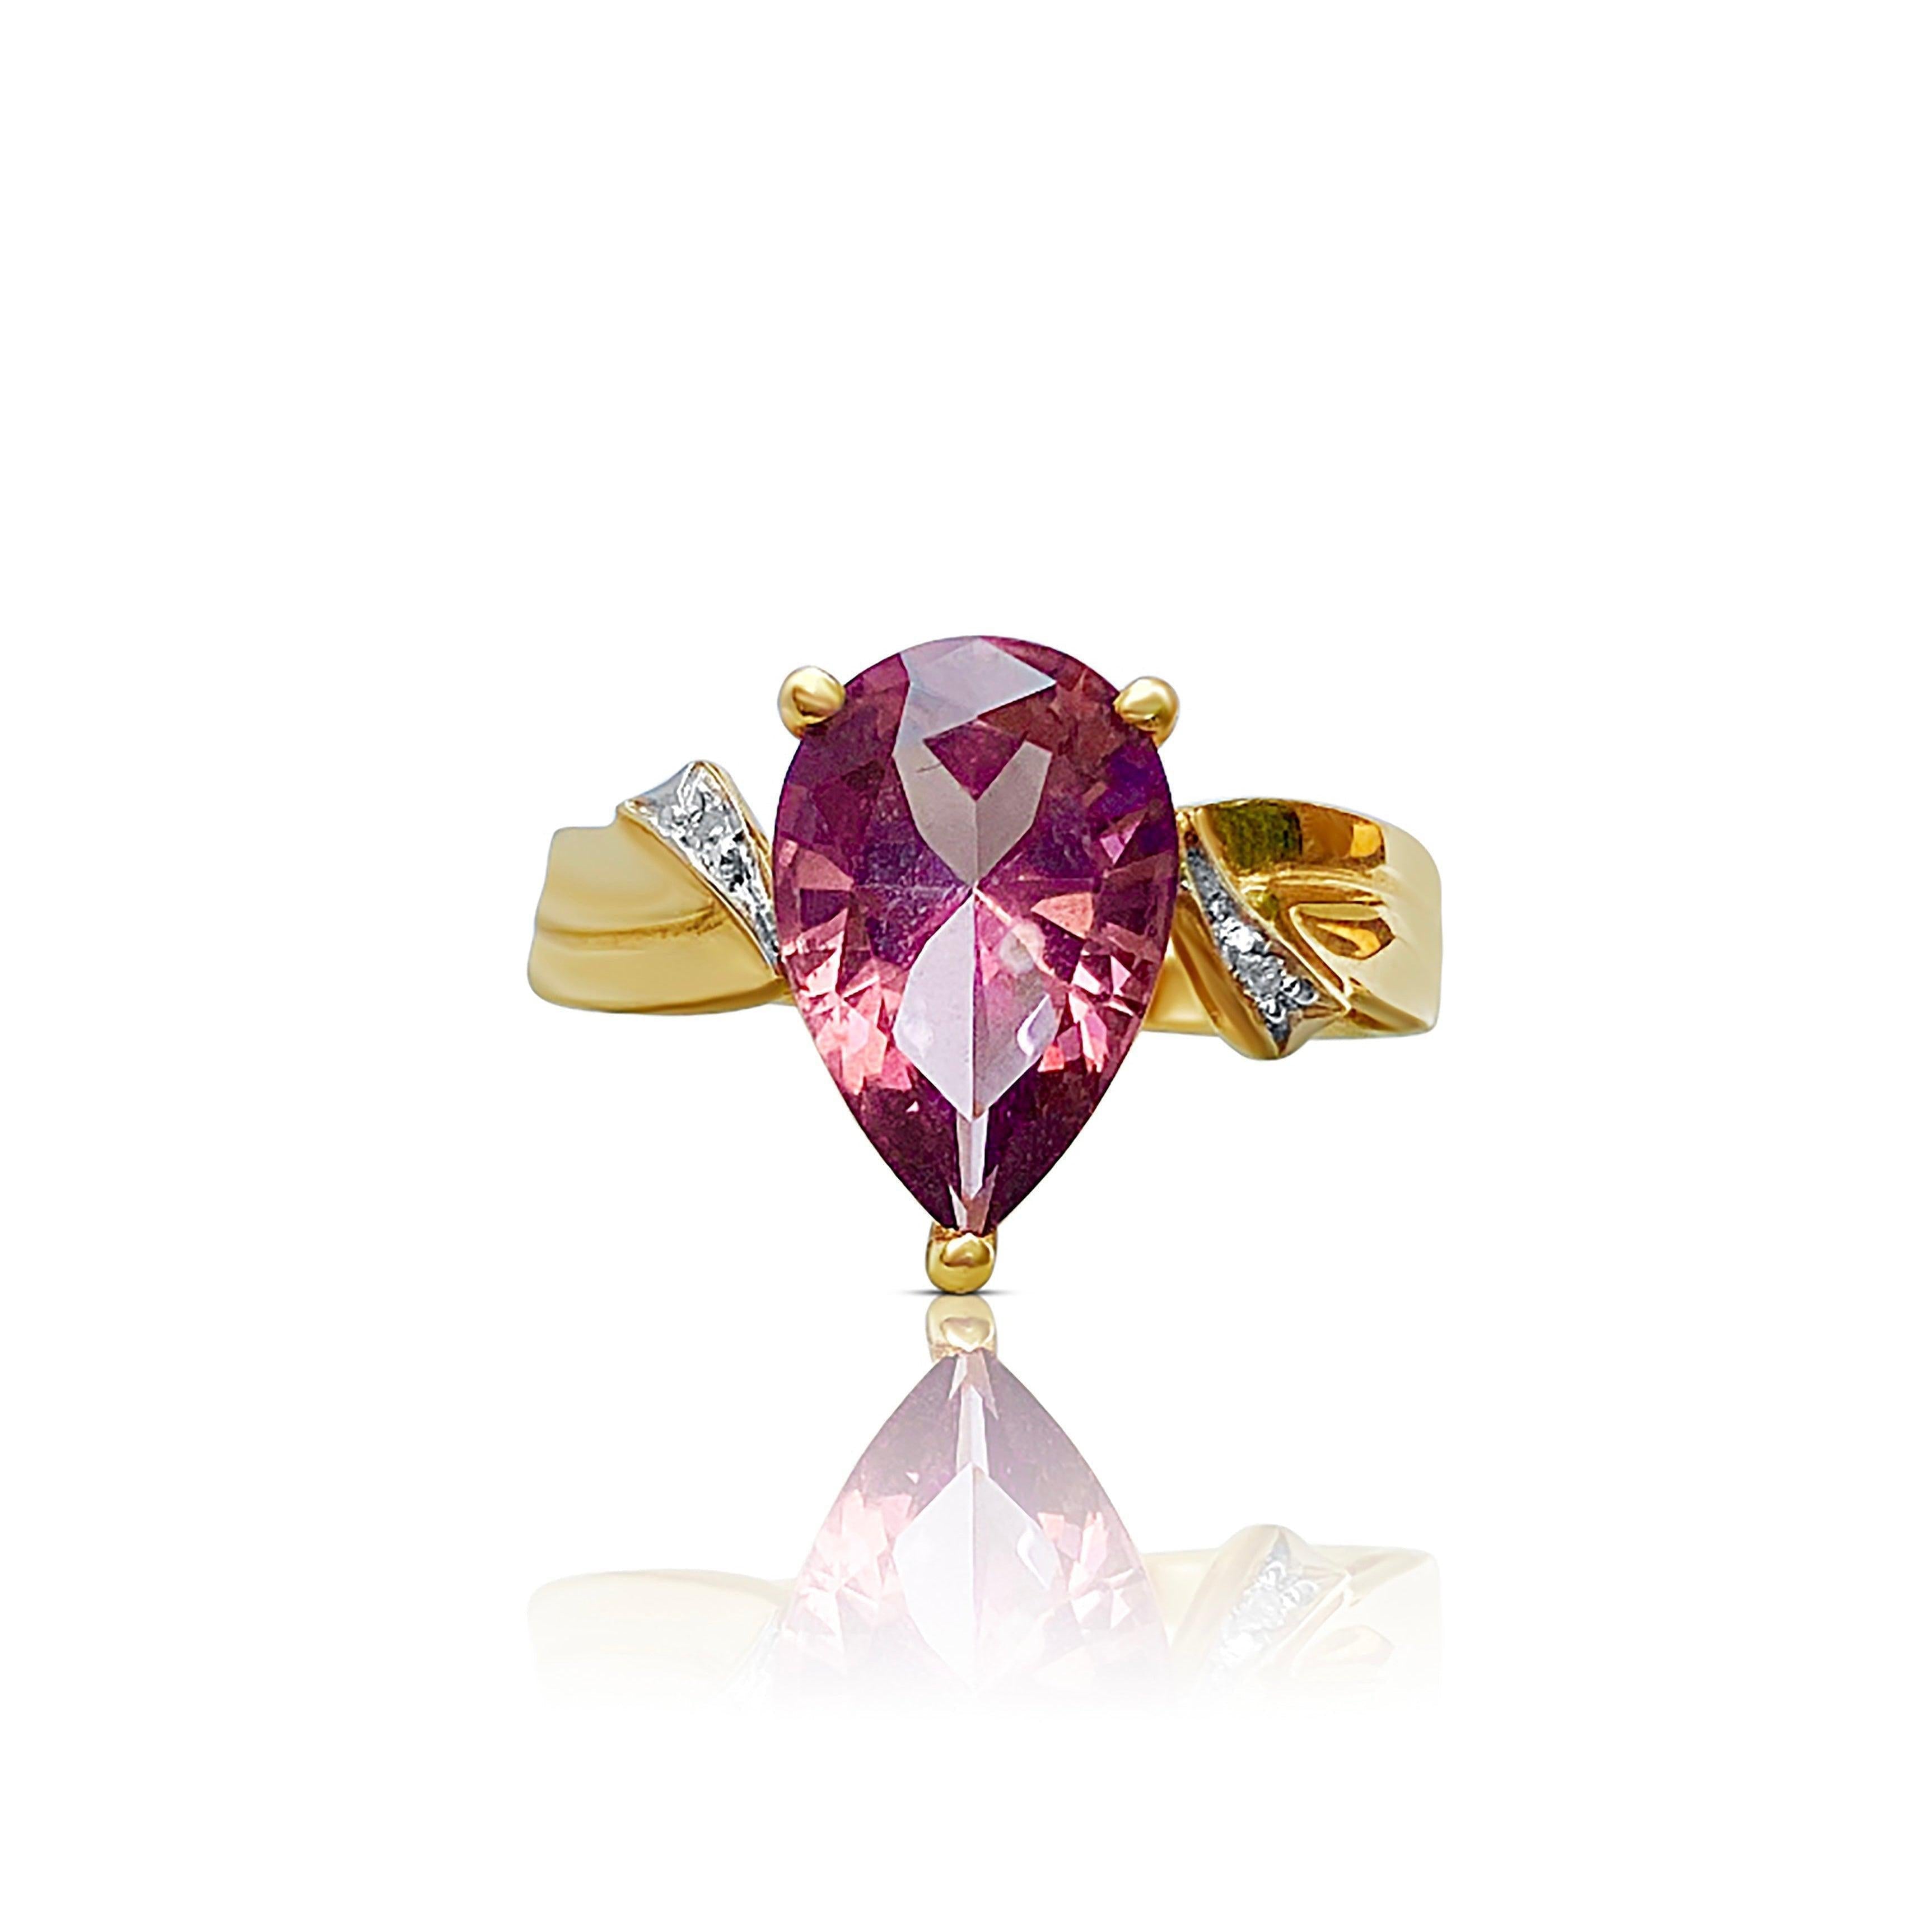 Burgundy Tourmaline Pear Shape Engagement Ring in 14k Yellow Gold - ASSAY